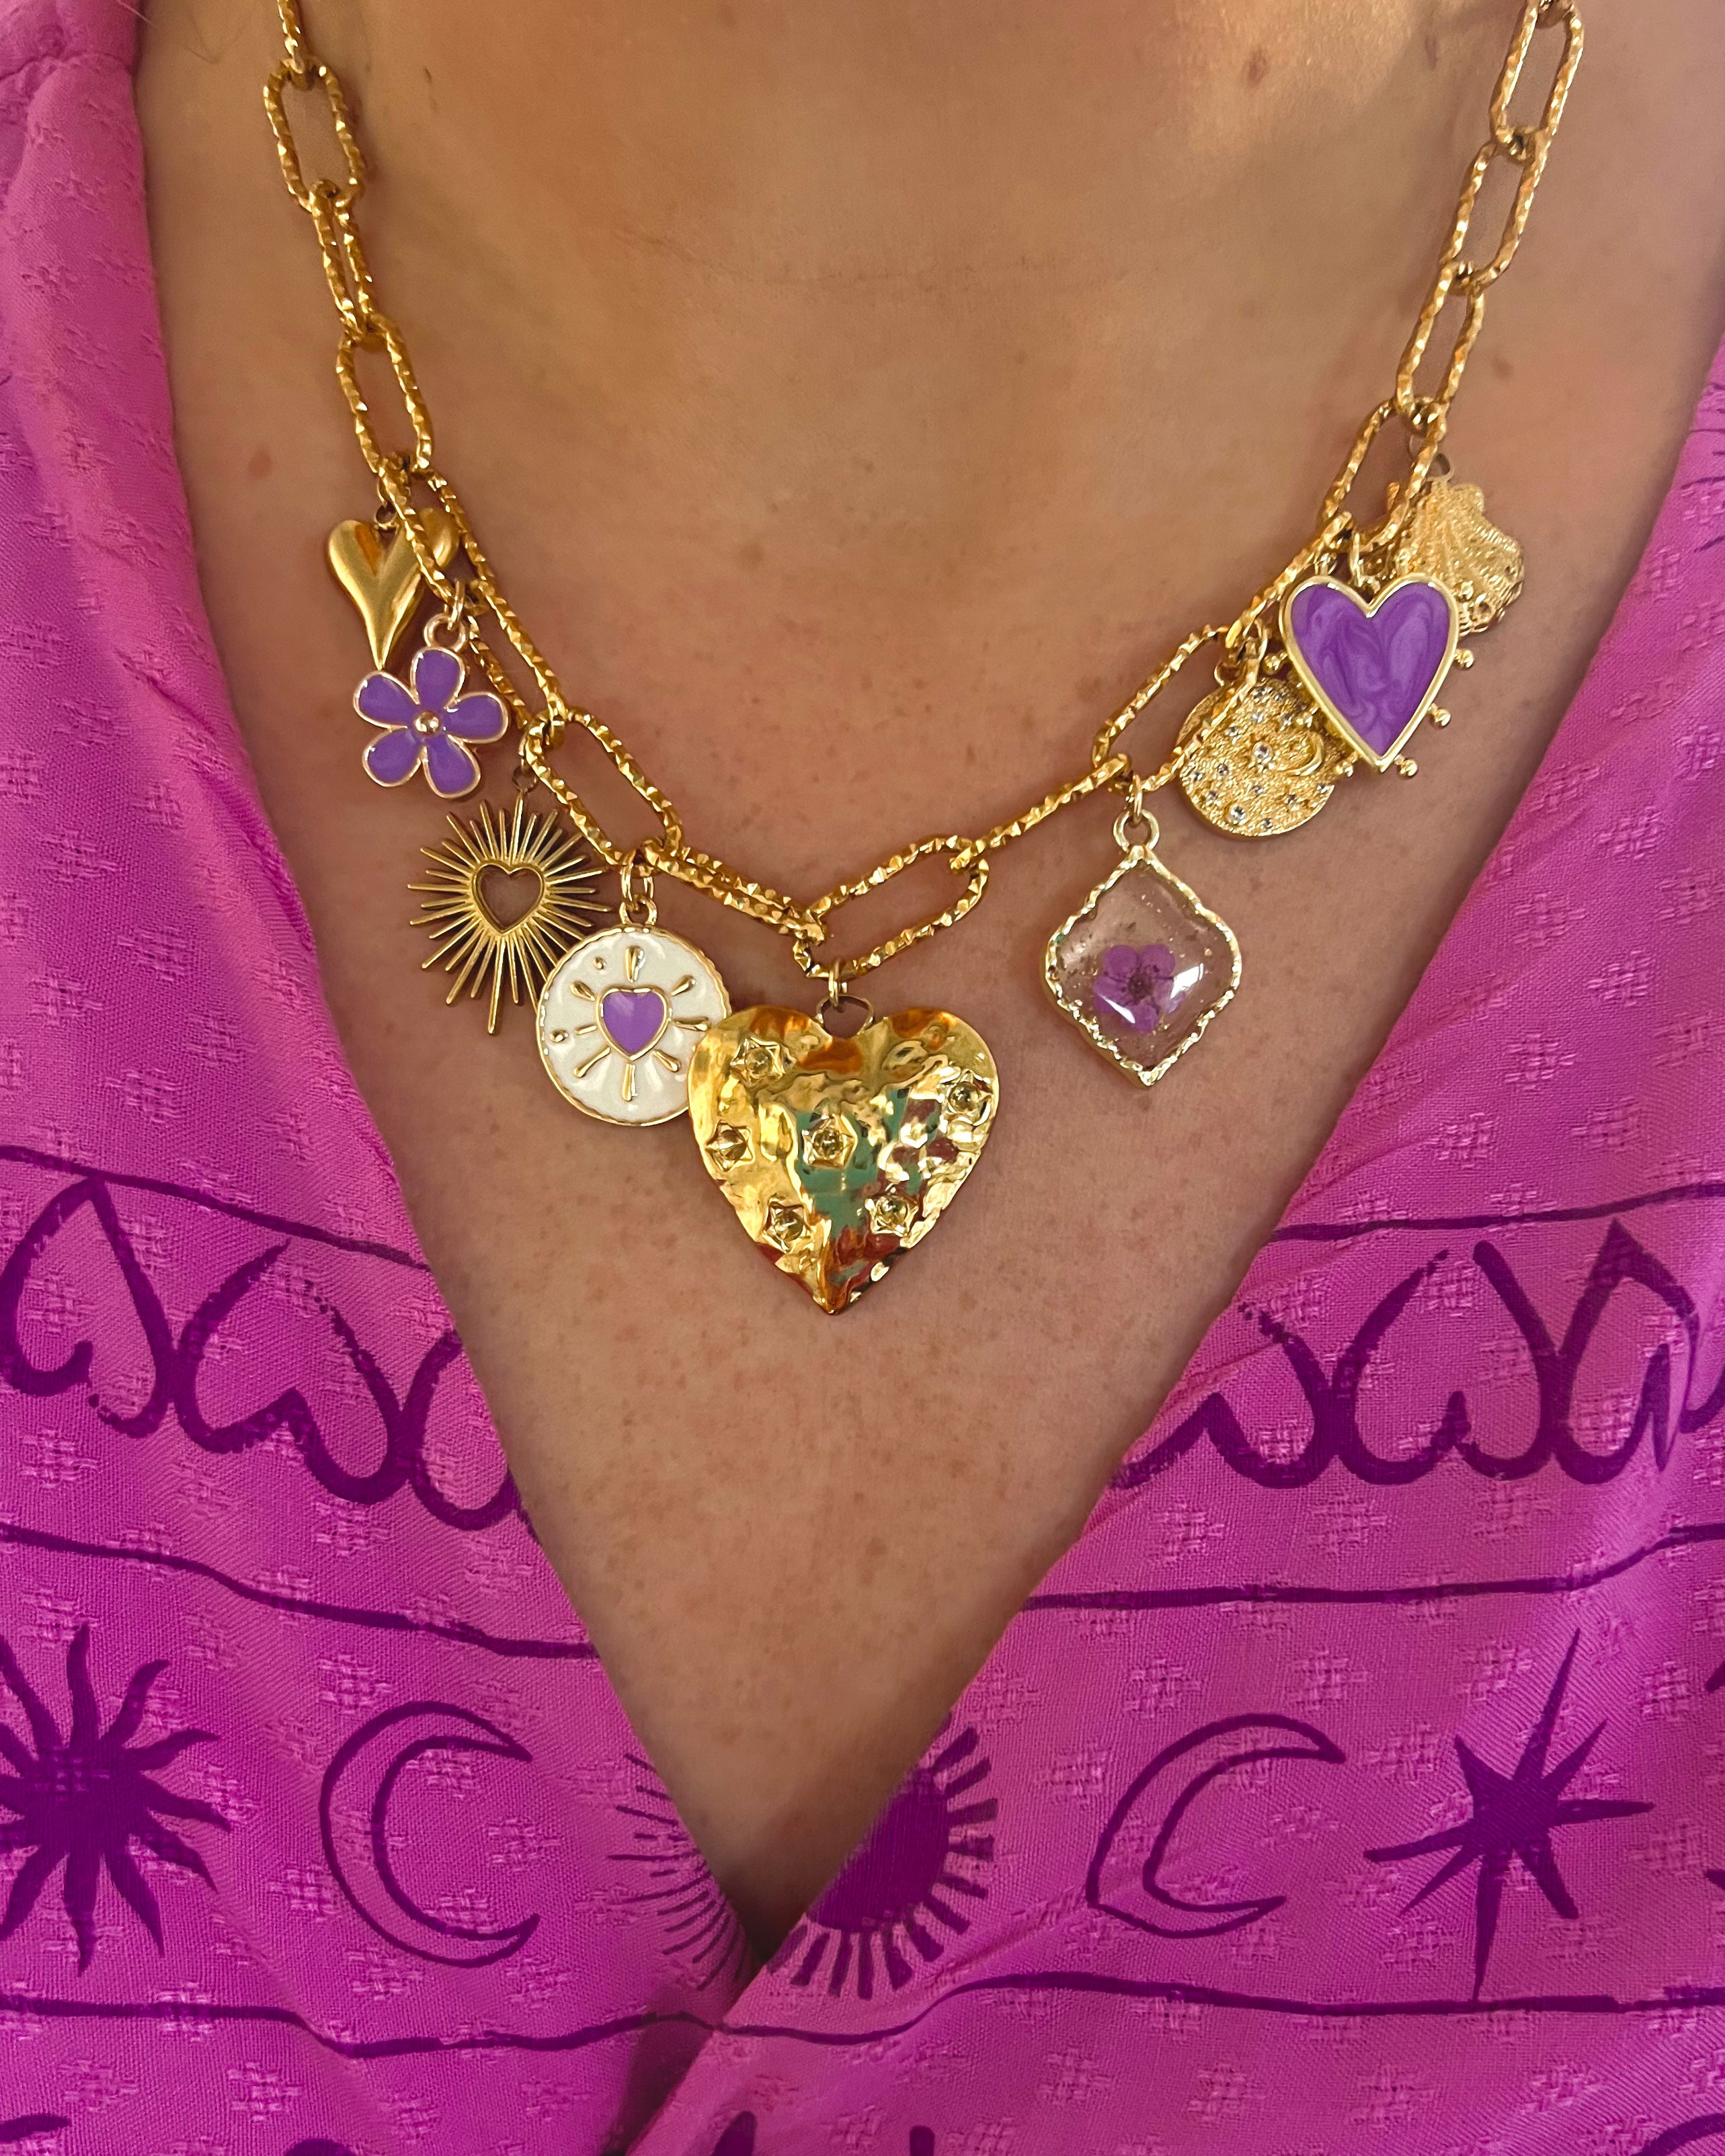 “purple madness” charm necklace gold